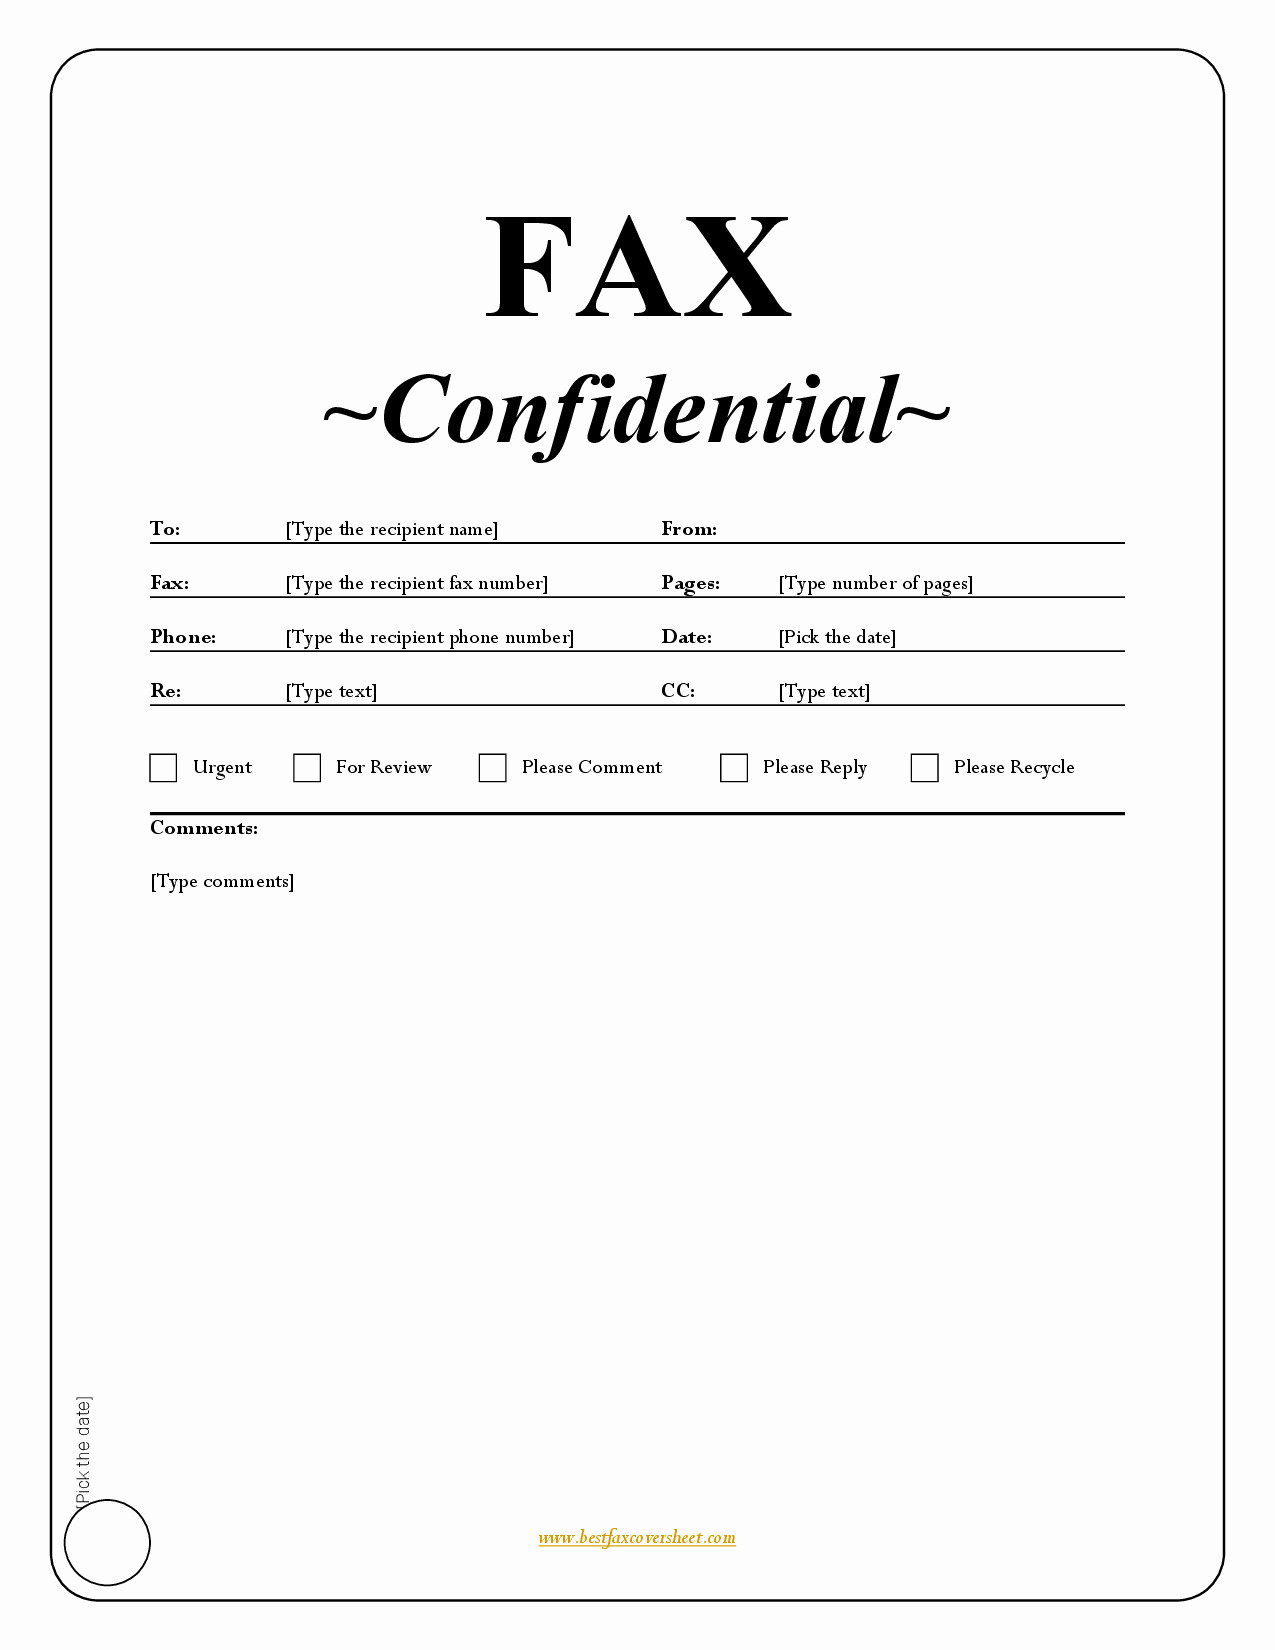 Fax Cover Sheet Pdf format Awesome Printable Fax Cover Sheet with Confidentiality Statement